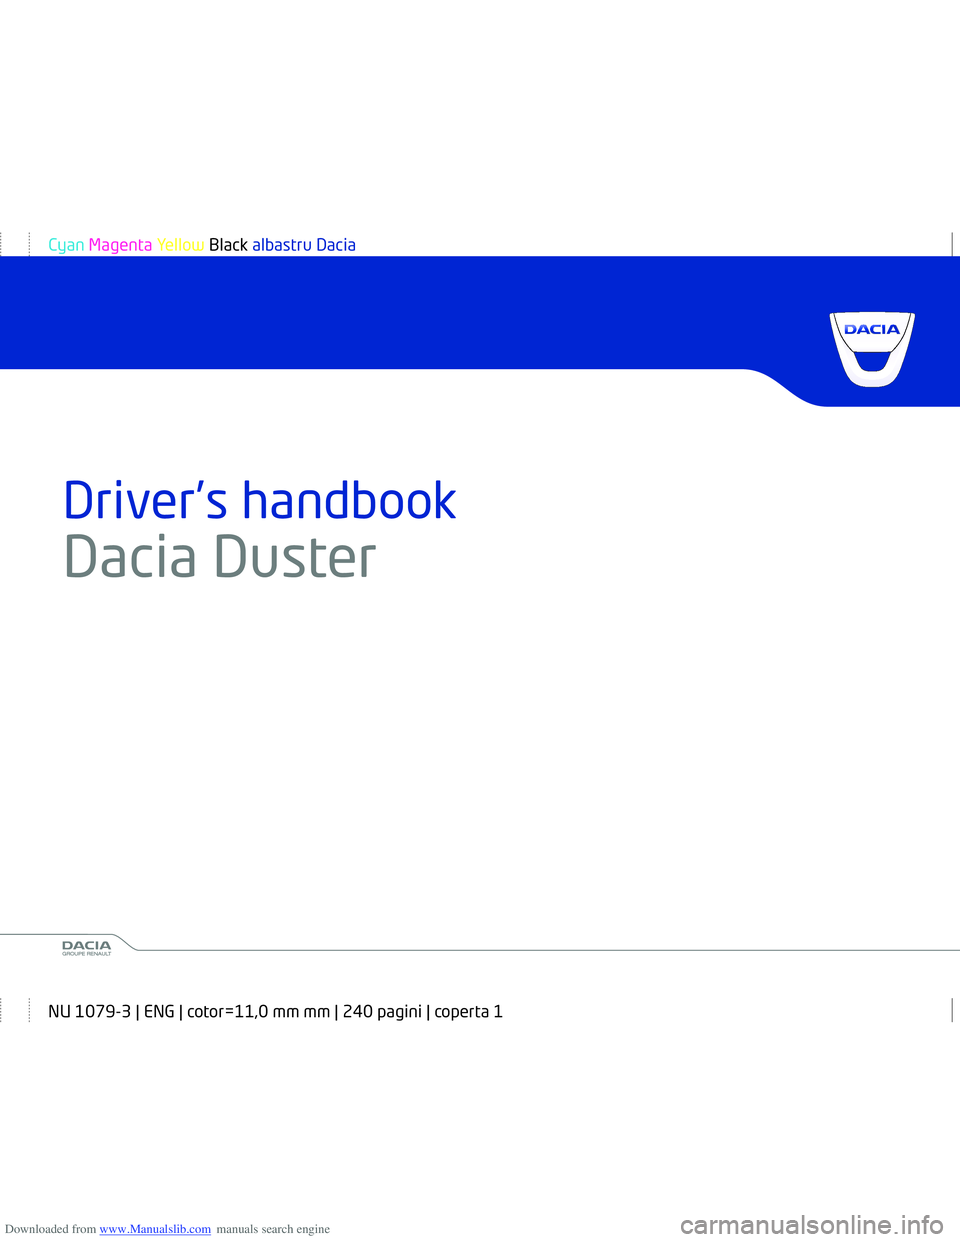 DACIA DUSTER 2014  Owners Manual Downloaded from www.Manualslib.com manuals search engine www.daciagroup.com
Driver’s handbook
Dacia  Duster        
Ref 999101781R / édition anglaiseNU 1079-3 - 07/2014
Cyan Magenta Yellow Black al